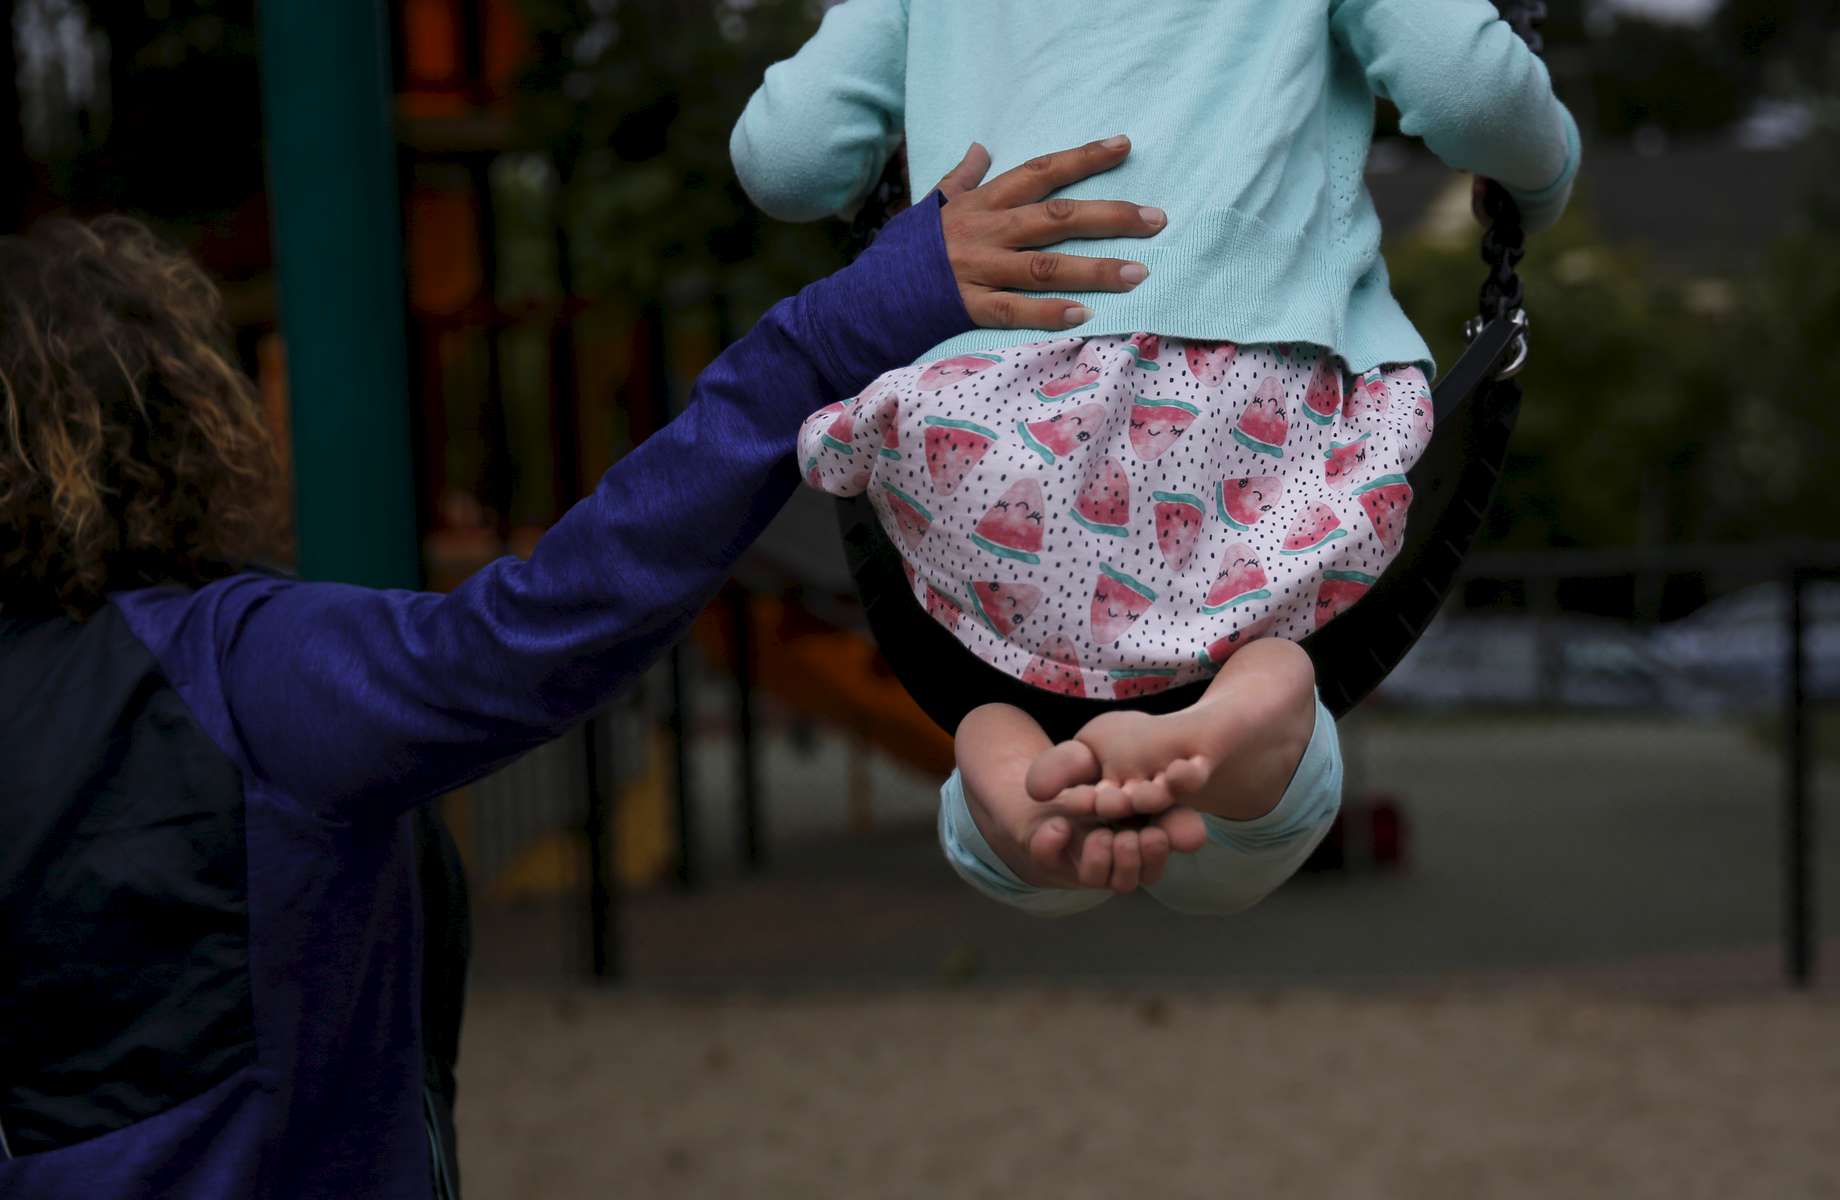 Sara Kaplan pushes her daughter Olivia, 5, on the swing as Olivia and James play in the park while they wait to get haircuts June 3, 2017 in Berkeley, Calif. Olivia, James' sibling, had been describing herself as trans for much of the past year since her brother came out as a transgender boy. Sara and Ben decided to brush it off to see if it was just something she was saying to copy her sibling. But it became apparent over time that it was very real to Olivia. She has always been a feminine child and she finally shouted at her parents that she was a girl at the beginning of the year. They cautiously allowed her to begin the transition. As of June, 2017, Olivia is still happily presenting as a girl. Sara and Ben plan on doing what they have for James: provide a supportive space for their children to be themselves whoever they turn out to be later in life.